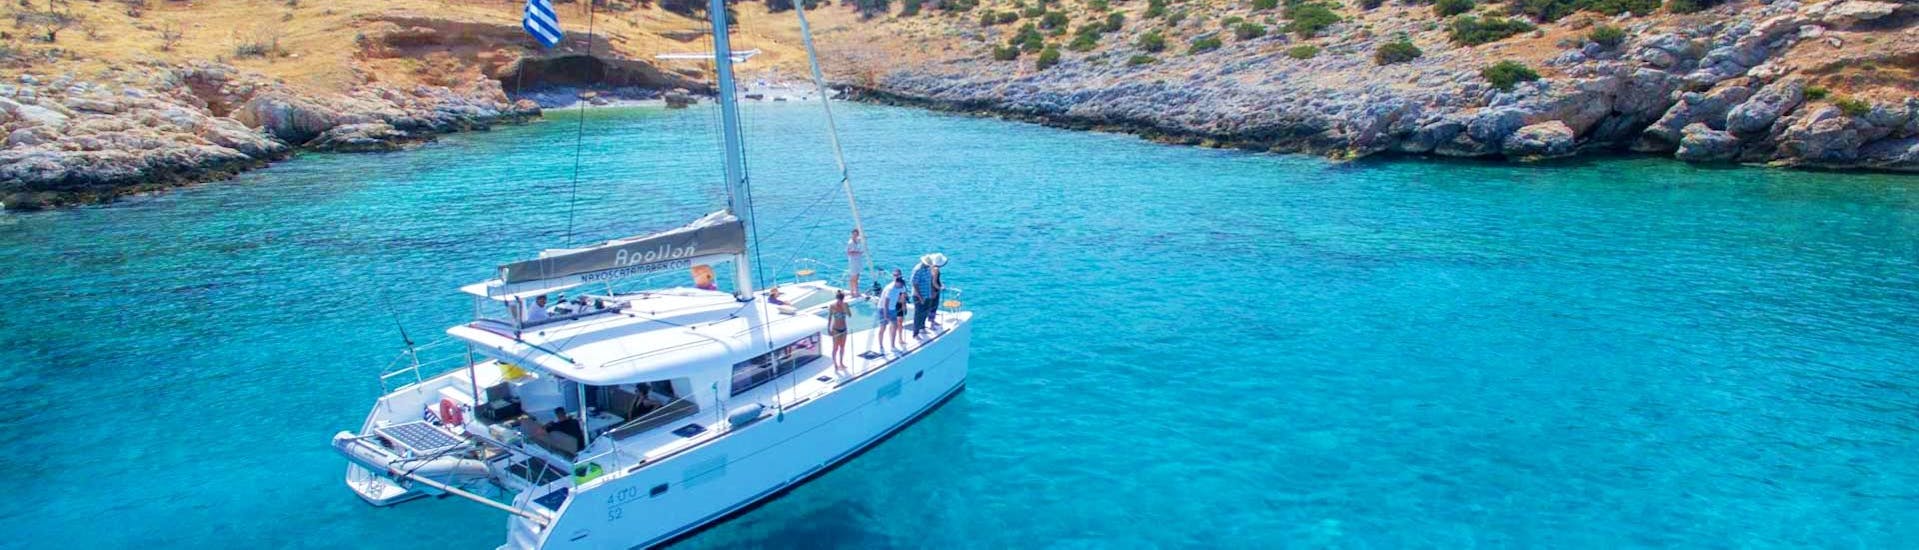 The catamaran Apollon from Naxos Catamaran is sailing along the rocky coast of the Cyclades during the Private Sailing Cruise on a Luxury Catamaran from Naxos.